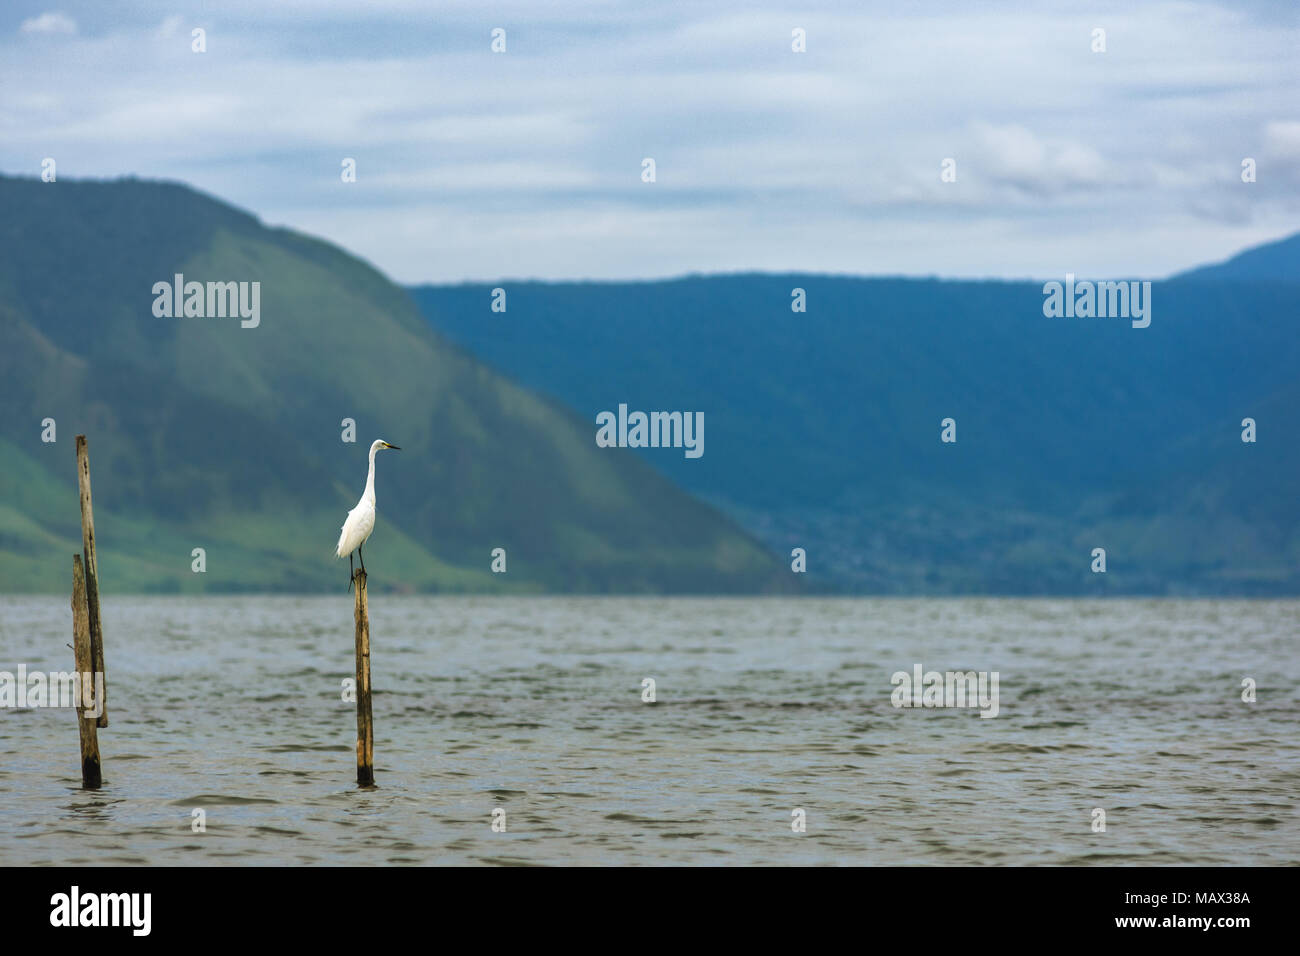 A snowy white egret perched on a wooden post in Lake Toba, Sumatra, Indonesia. Stock Photo